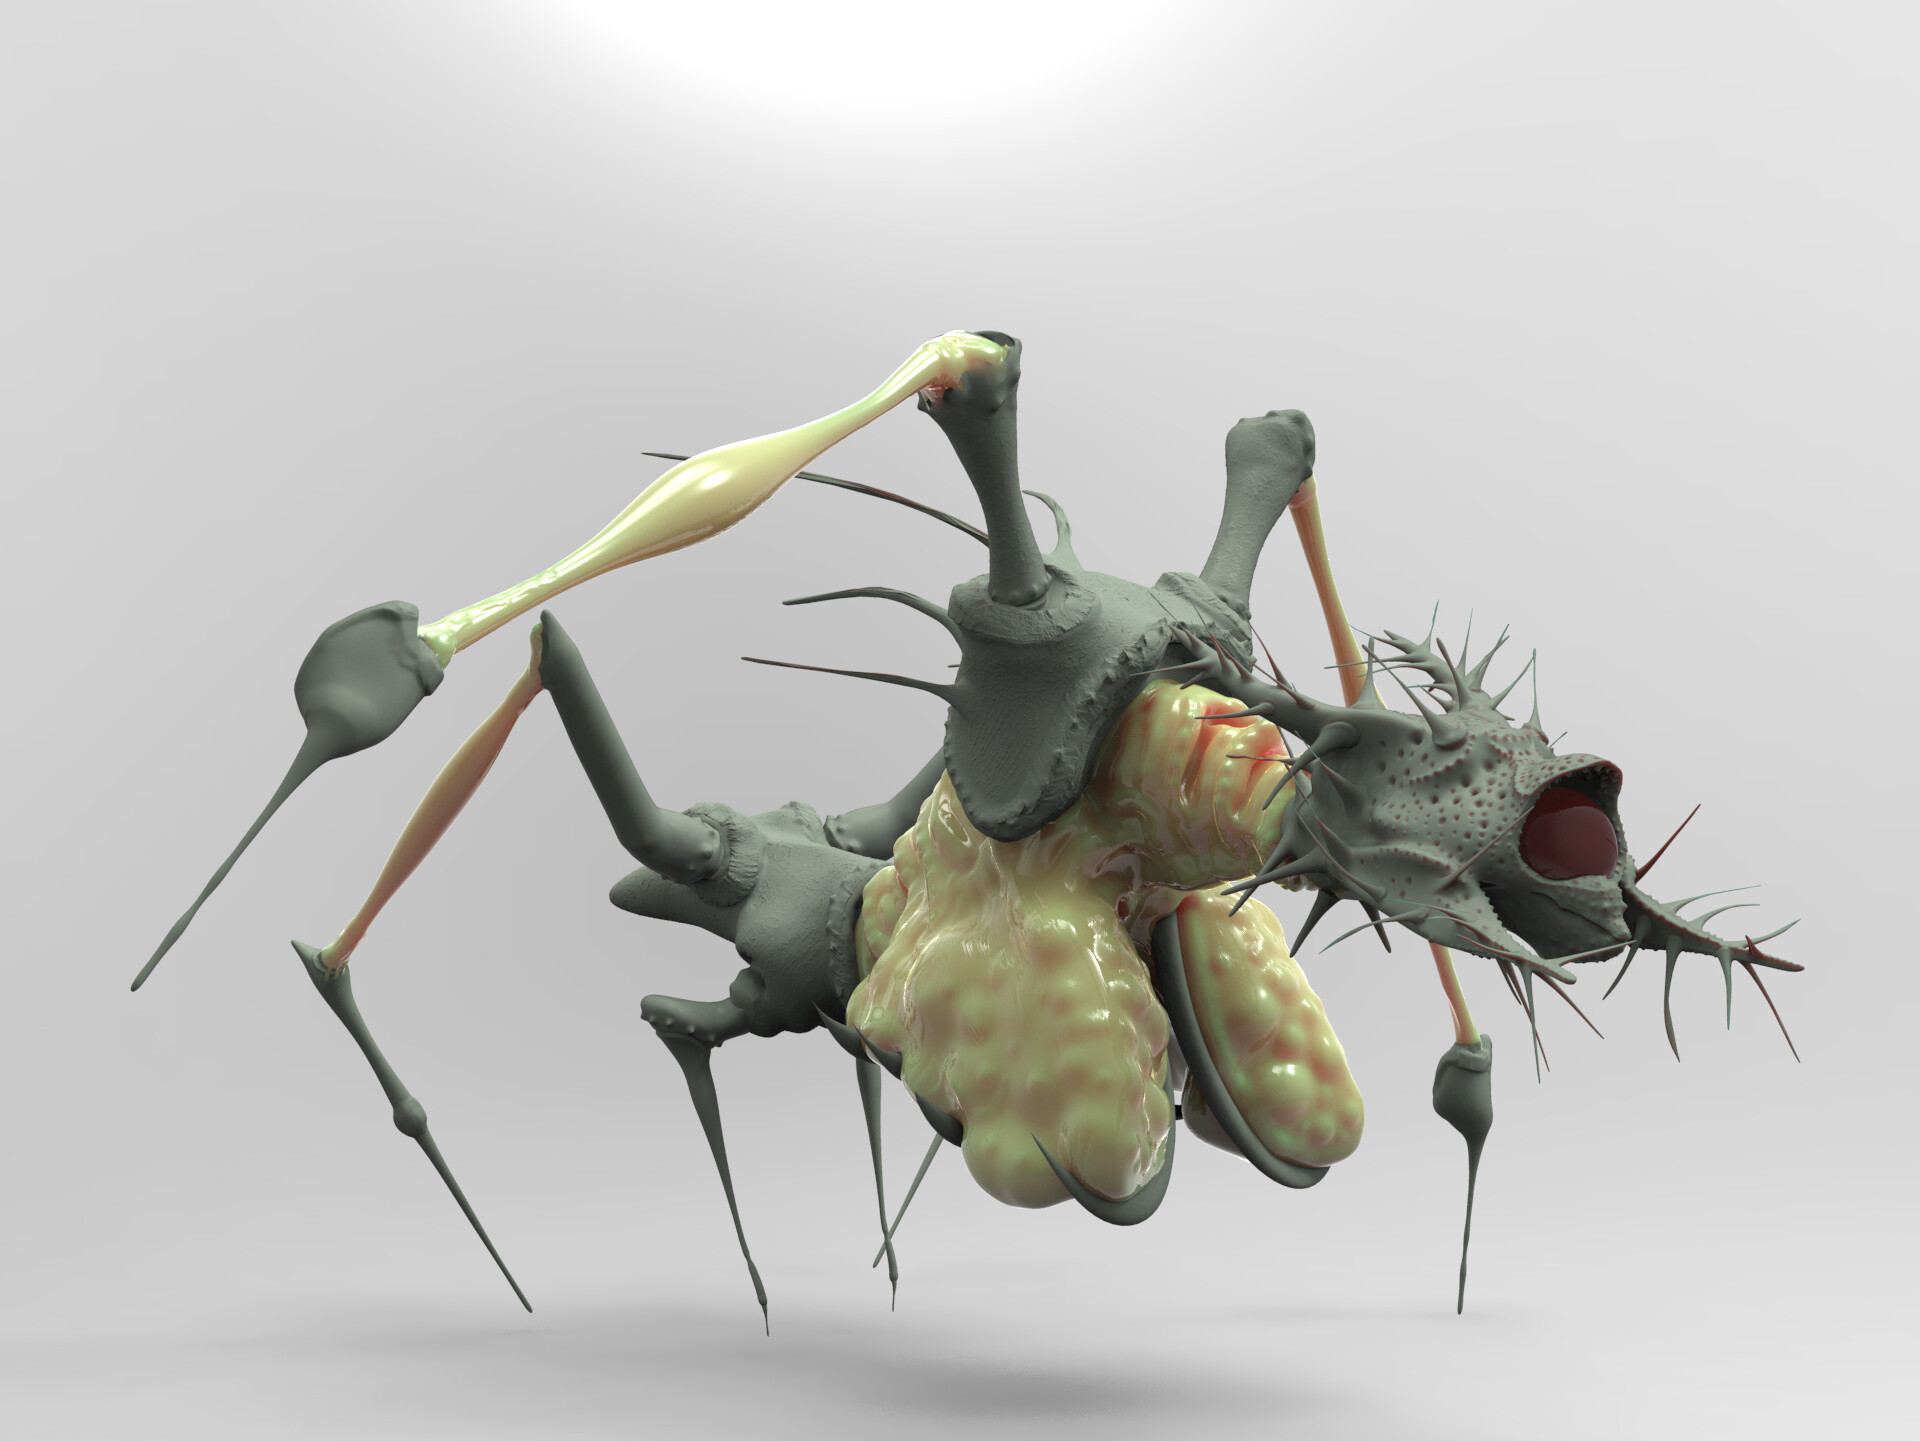 Insectoid creature with egg-sack.